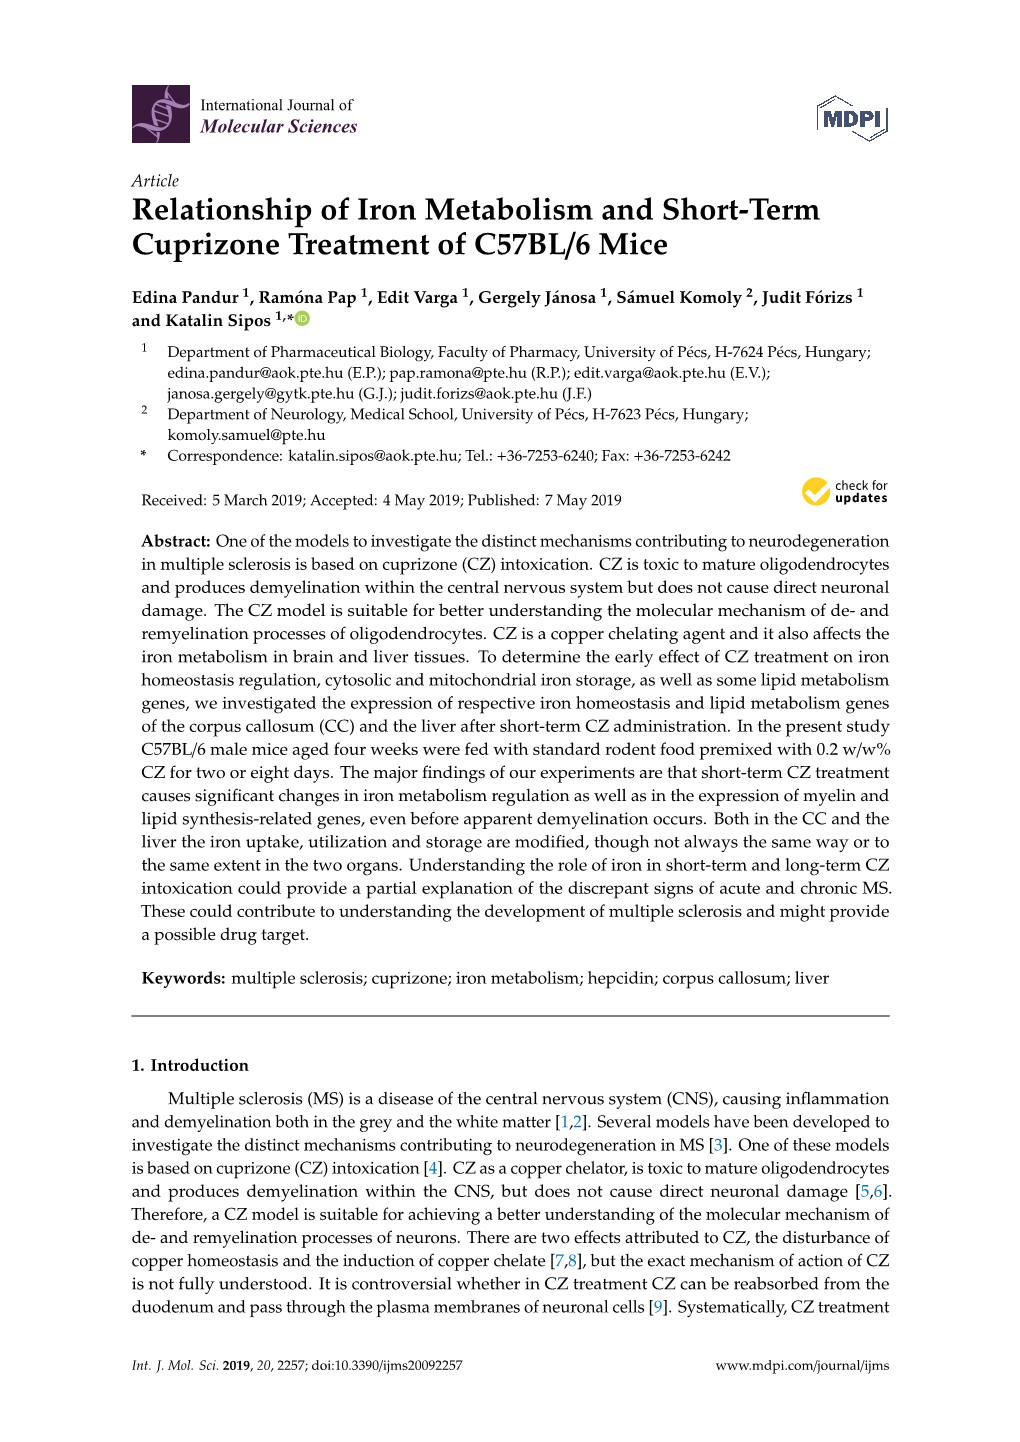 Relationship of Iron Metabolism and Short-Term Cuprizone Treatment of C57BL/6 Mice